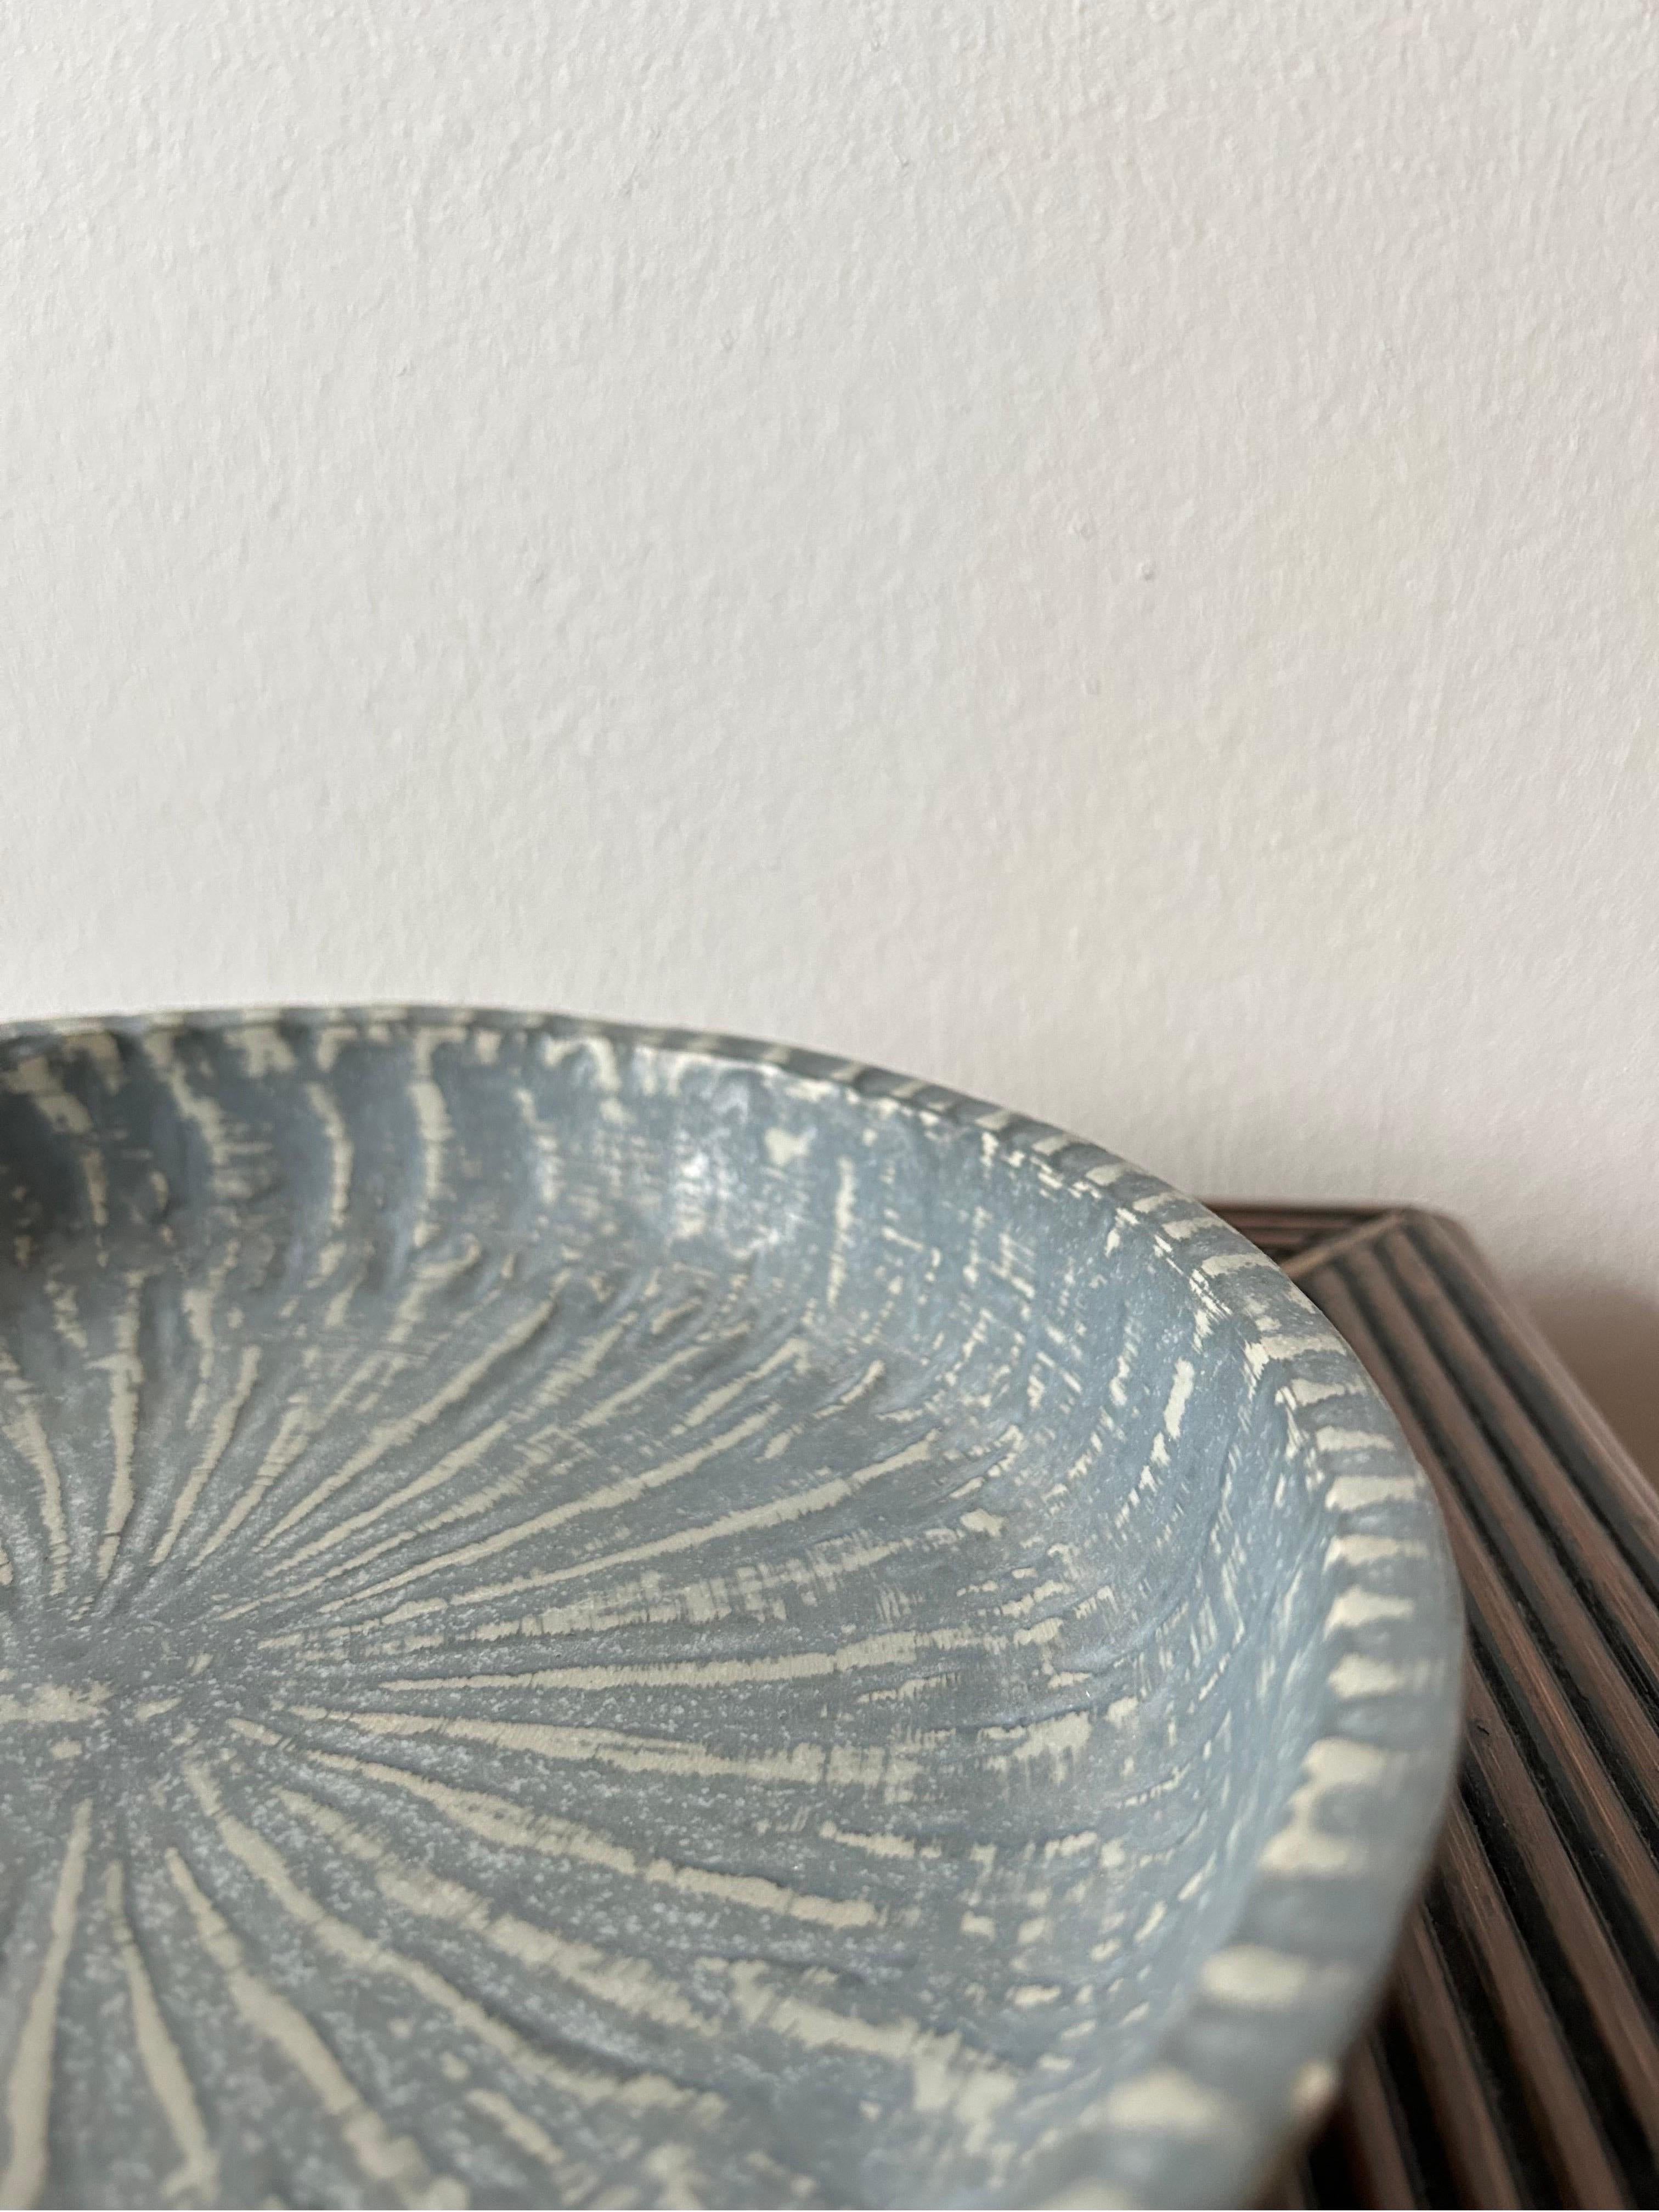 Highly decorative bowl by Swedish ceramic artist Gunnar Nylund from the Rubus series.

The bowl has a beautiful light blue glaze which adds great detail to the piece.


Use it for fruit or nuts or whatever else you could think of placing in